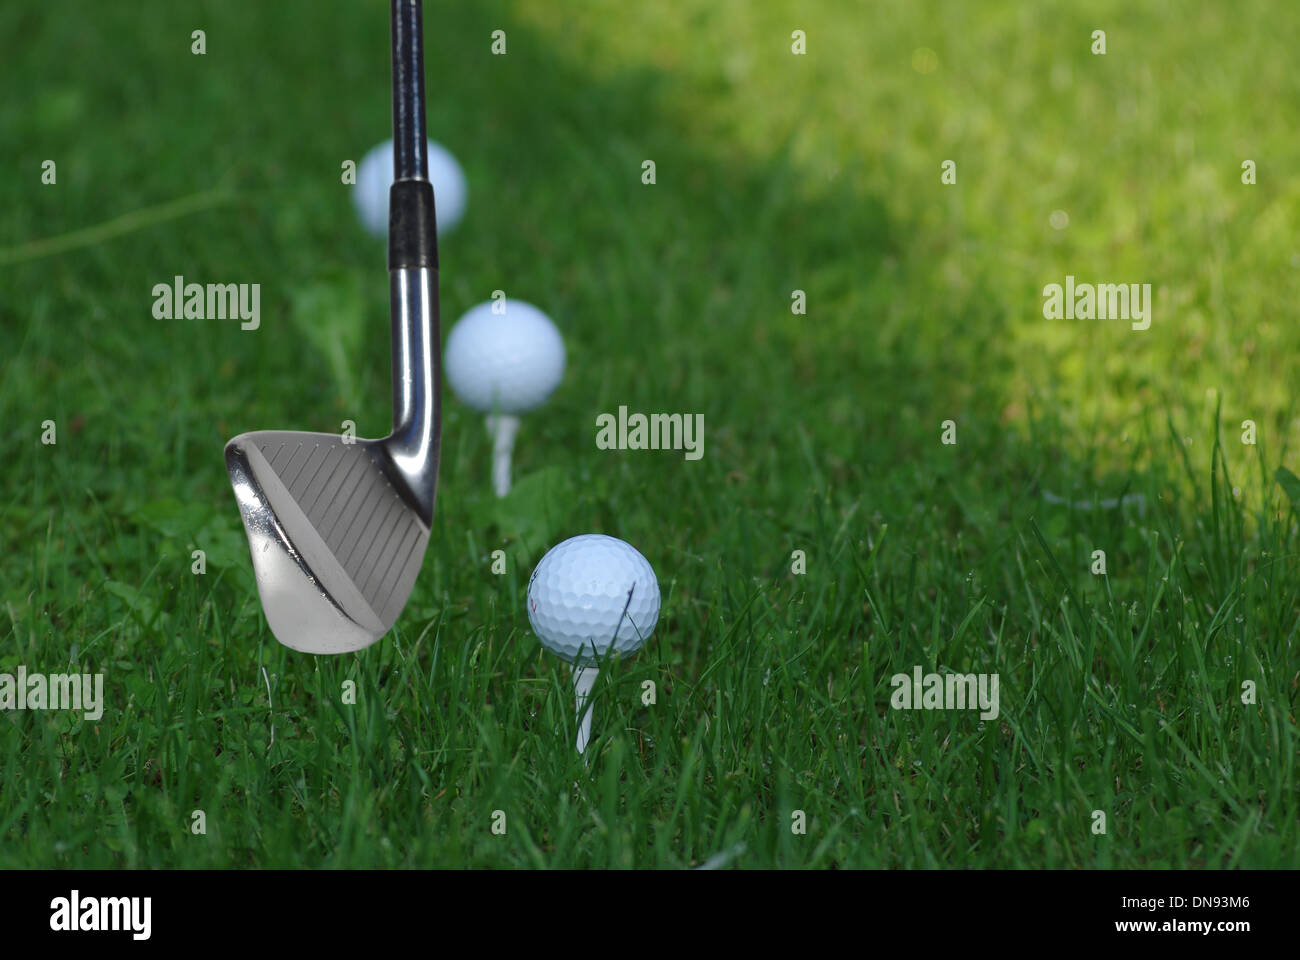 golf stick on moment before hitting in ball Stock Photo